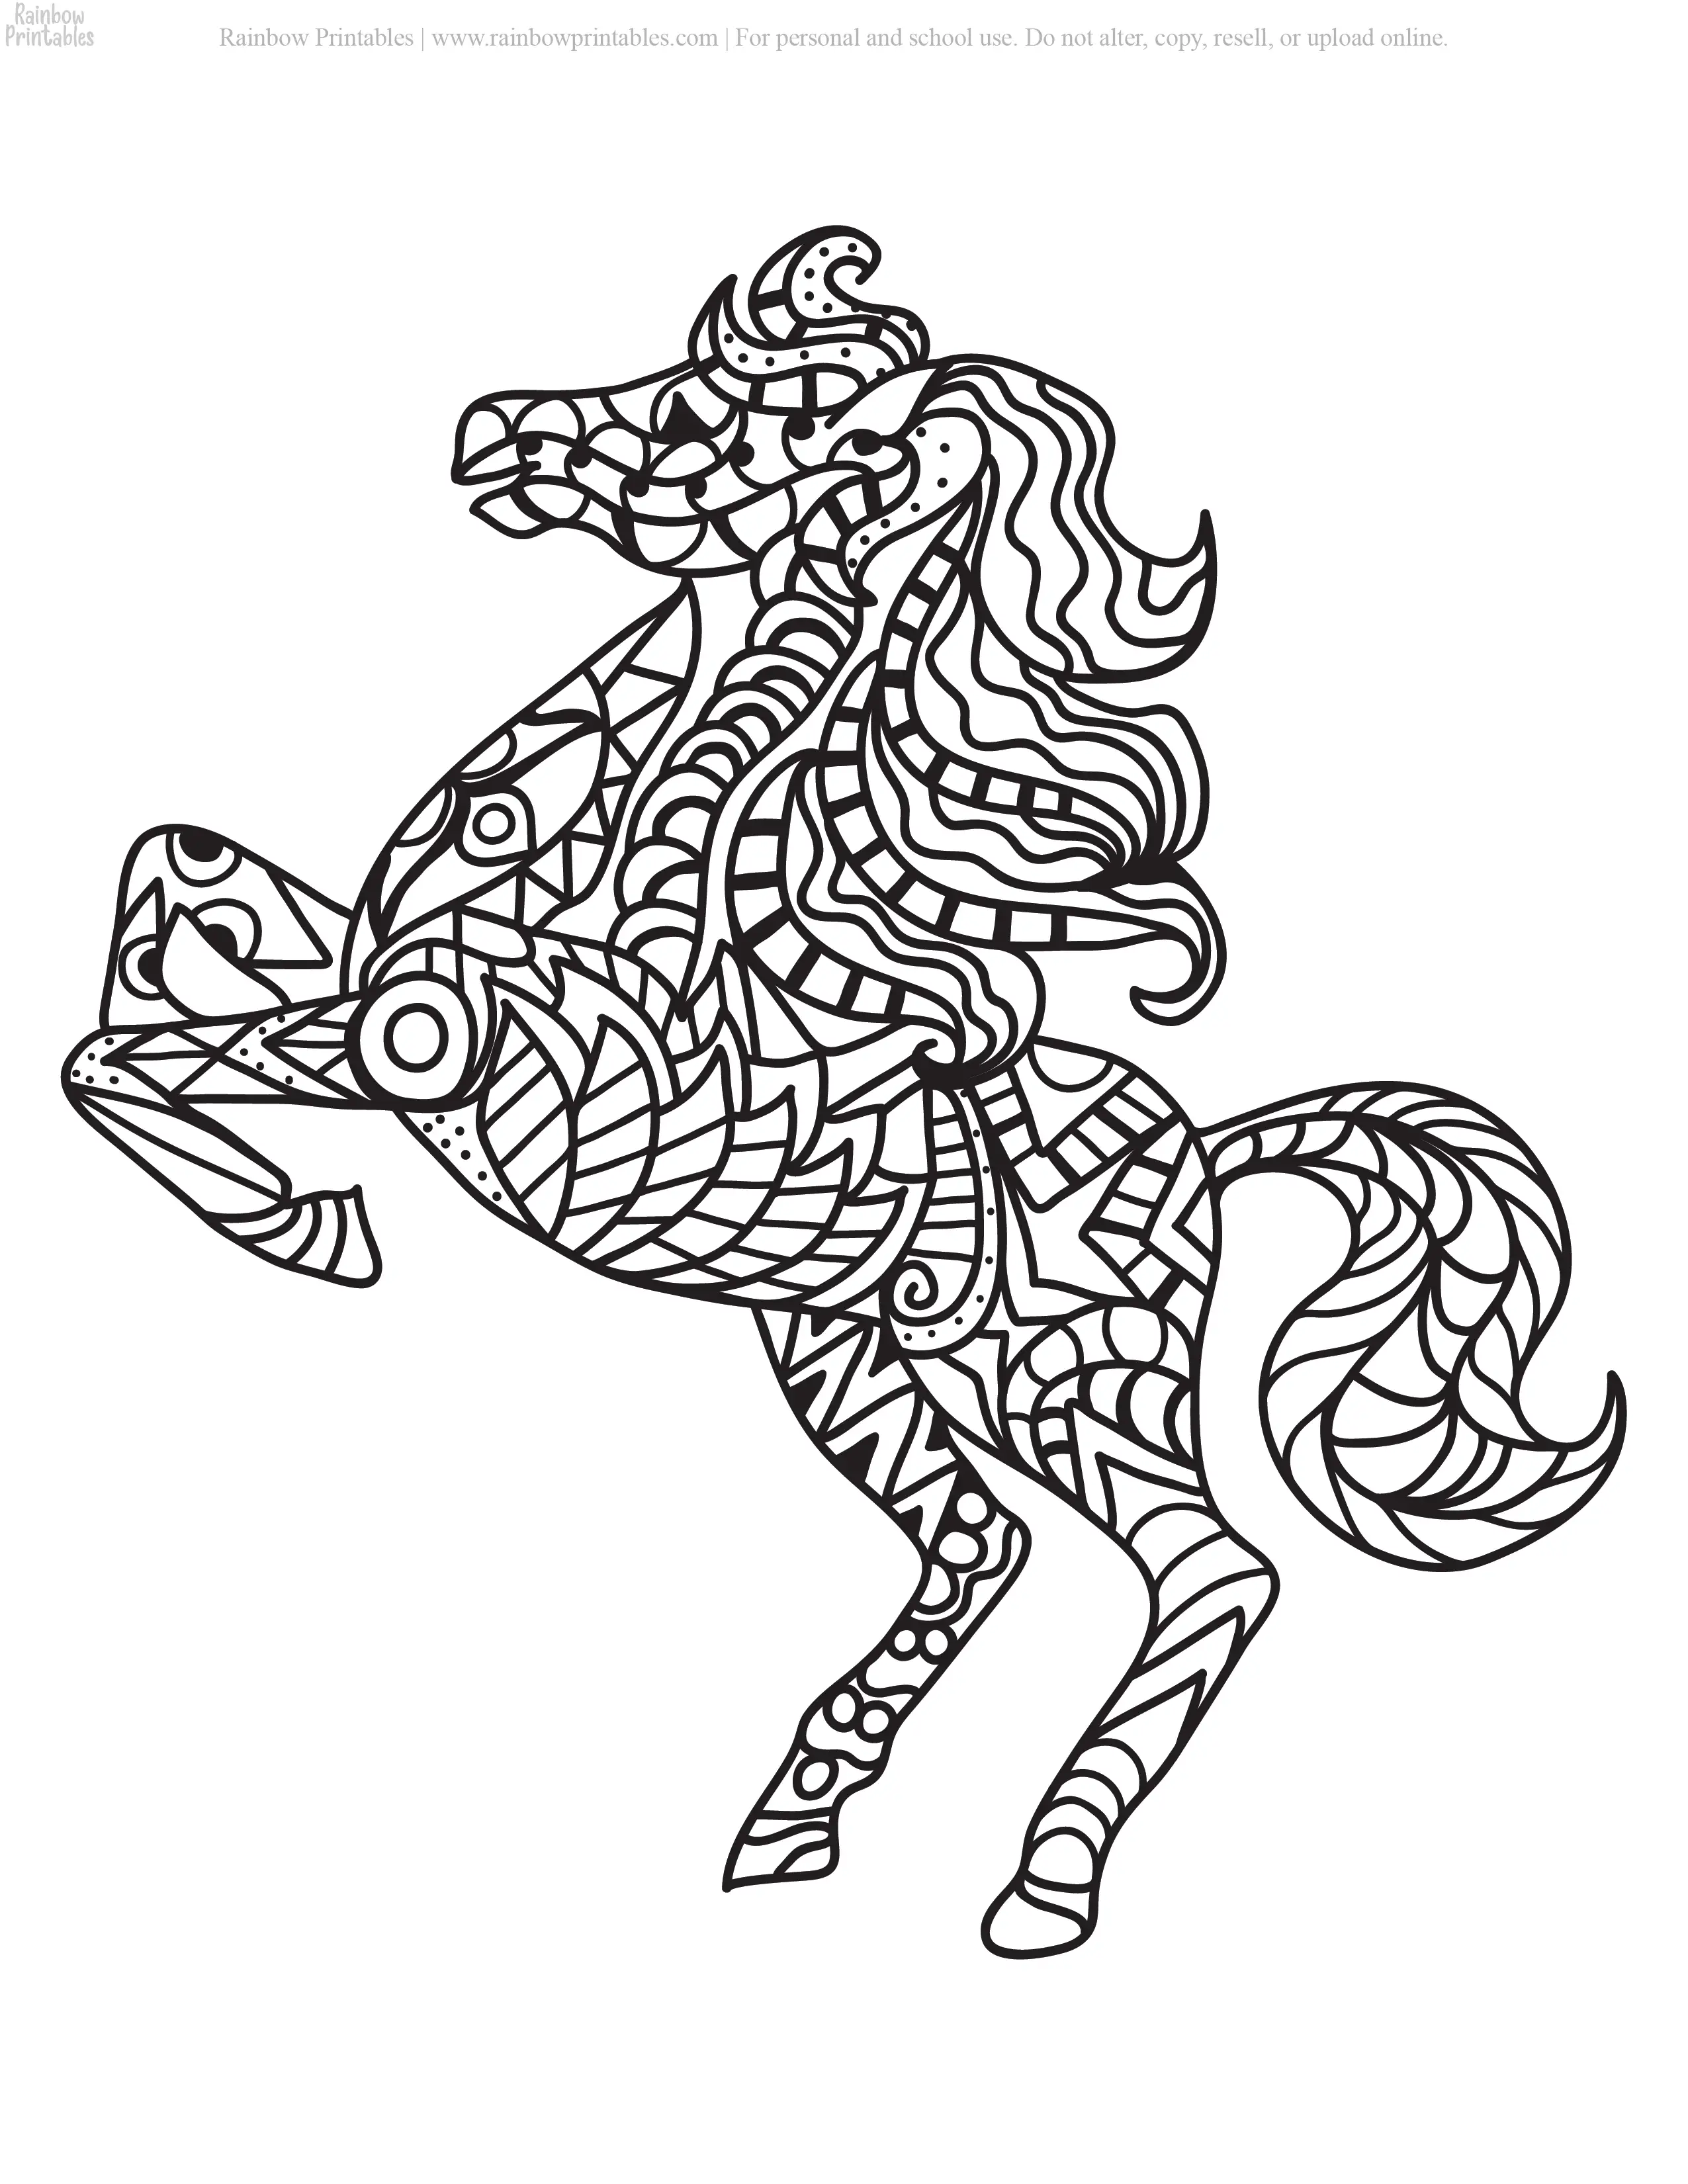 MOASIC MANDALA SEA HORSE FANTASY COLORING PAGES FOR ADULTS GROWN UP PRINTABLE ACTIVITY